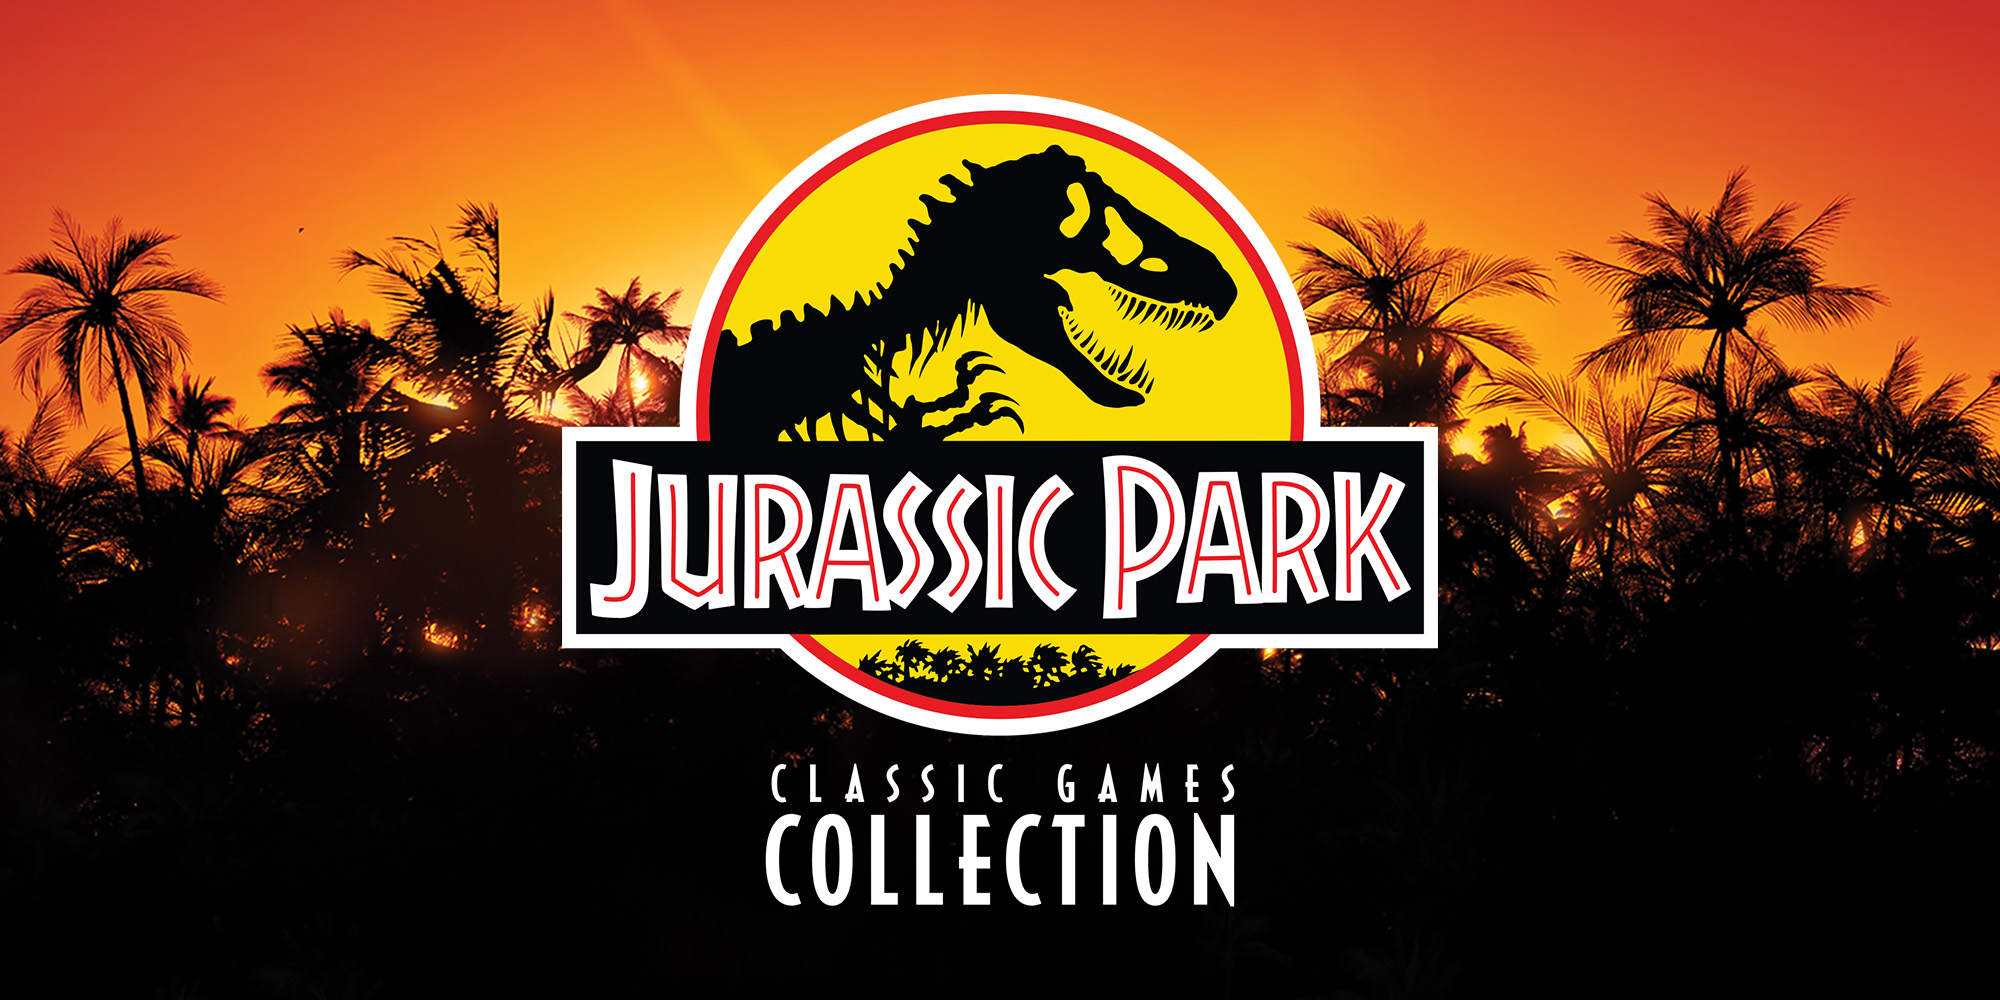 Jurassic Park Classic Games Collection, Nintendo Switch games, Games